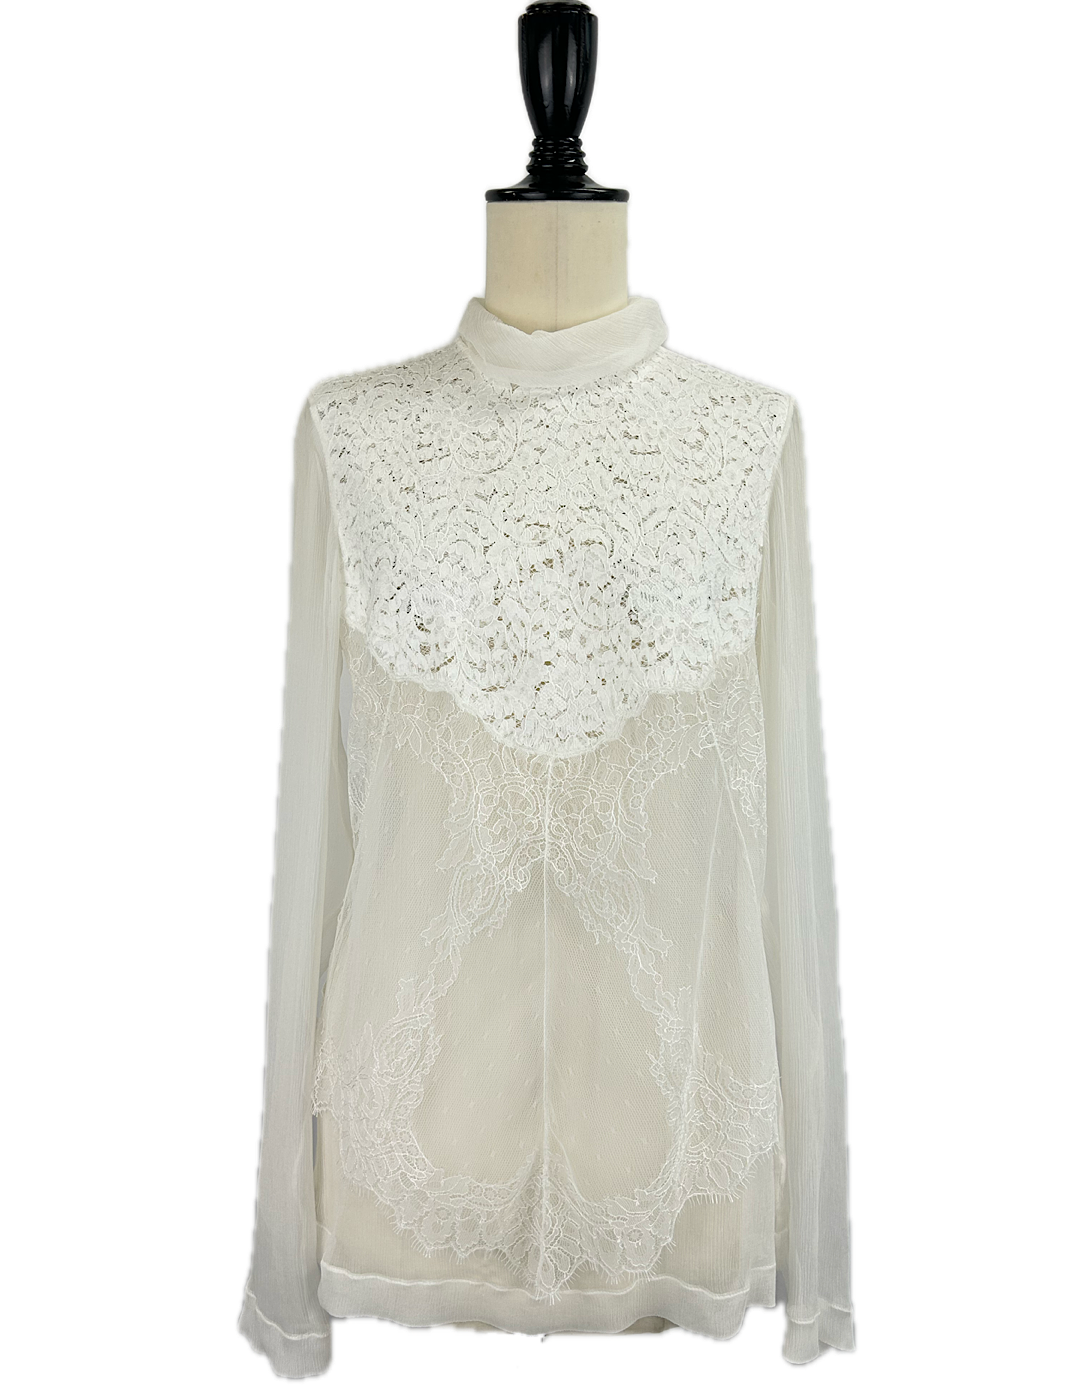 <img class='new_mark_img1' src='https://img.shop-pro.jp/img/new/icons47.gif' style='border:none;display:inline;margin:0px;padding:0px;width:auto;' />N21 / LACE BLOUSE